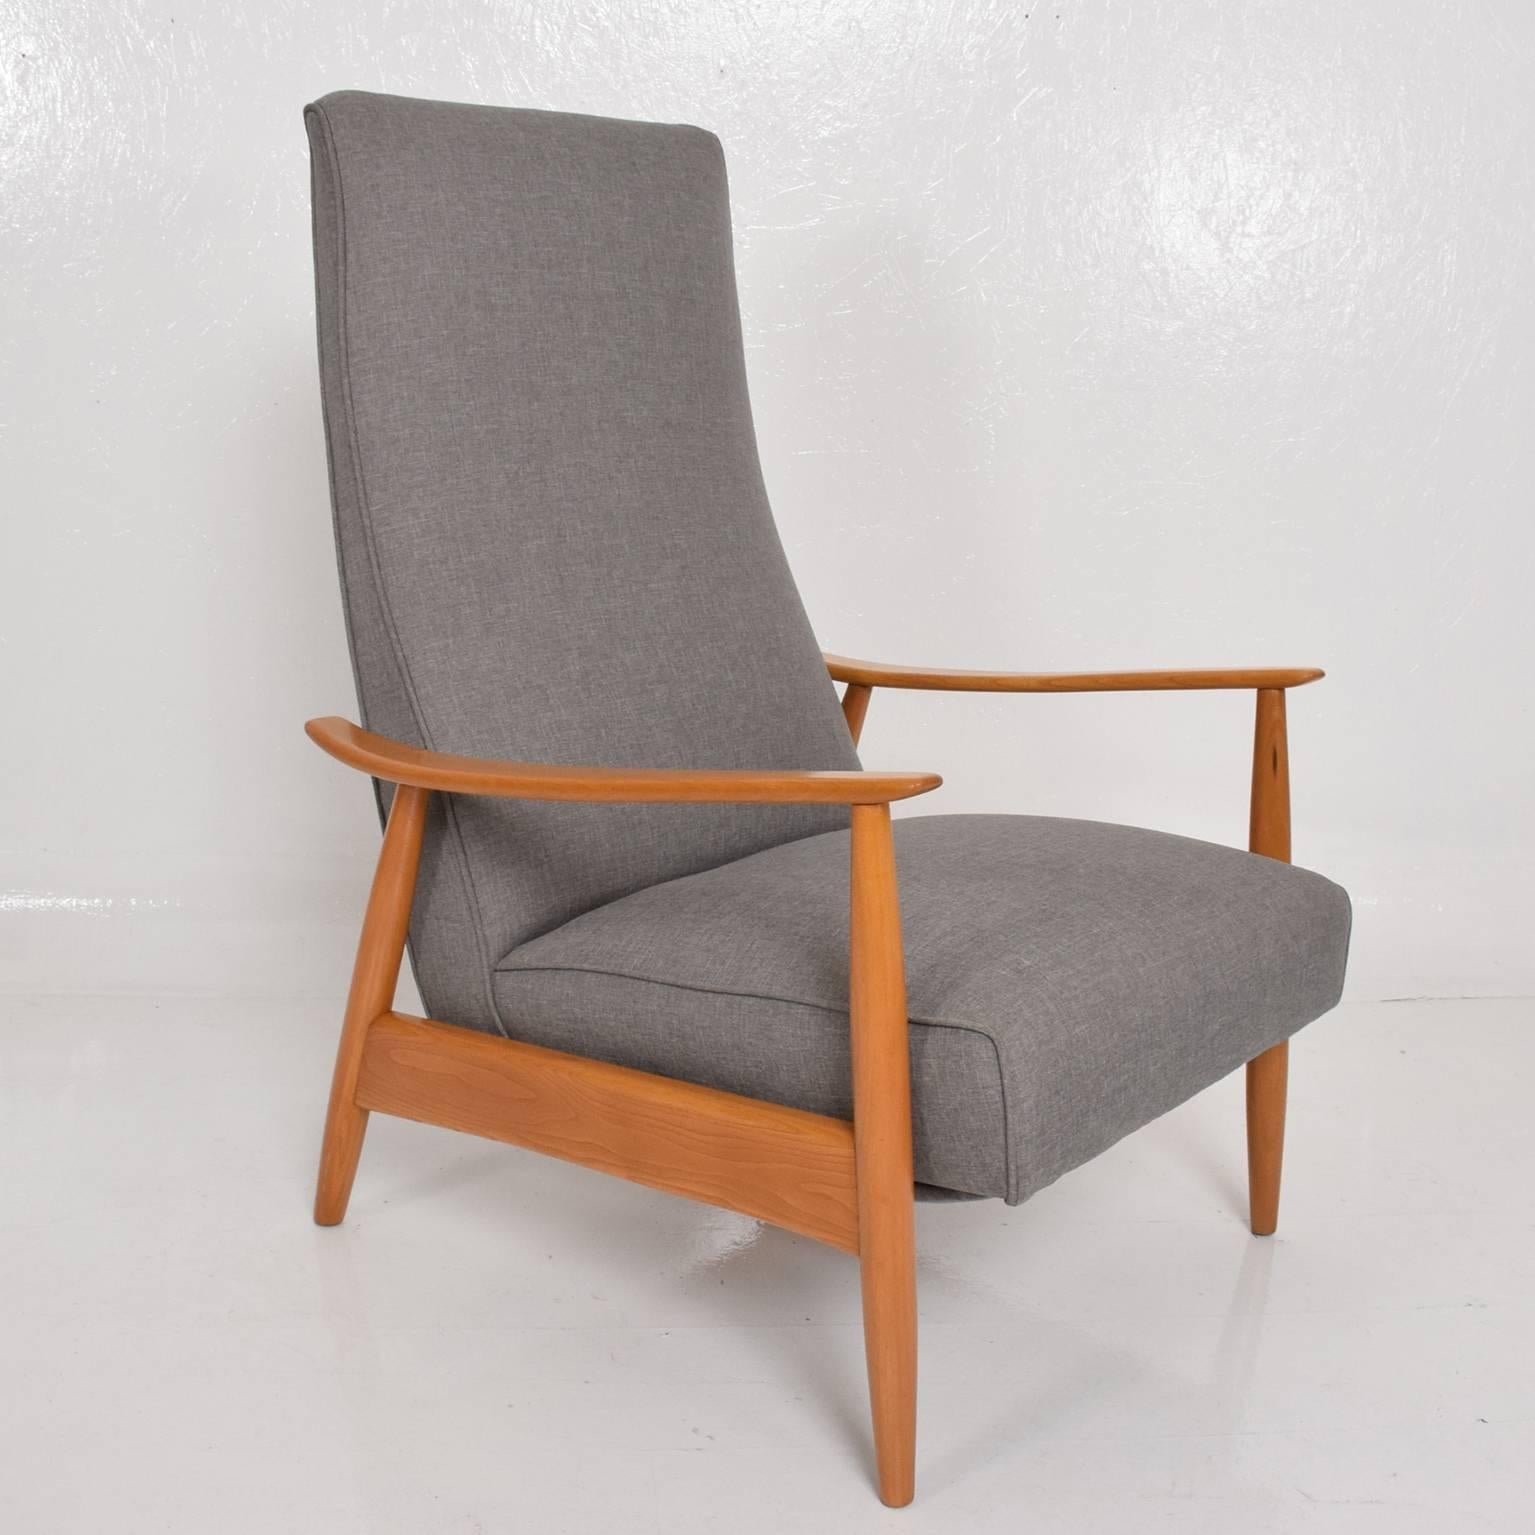 For your consideration a recliner armchair, designed by Milo Baughman for Thayer Coggin.
Beautifully restored in grey fabric. Wood has been cleaned up and restored. Retails original label.
Firm and sturdy ready to go.
Dimensions: 42 1/2